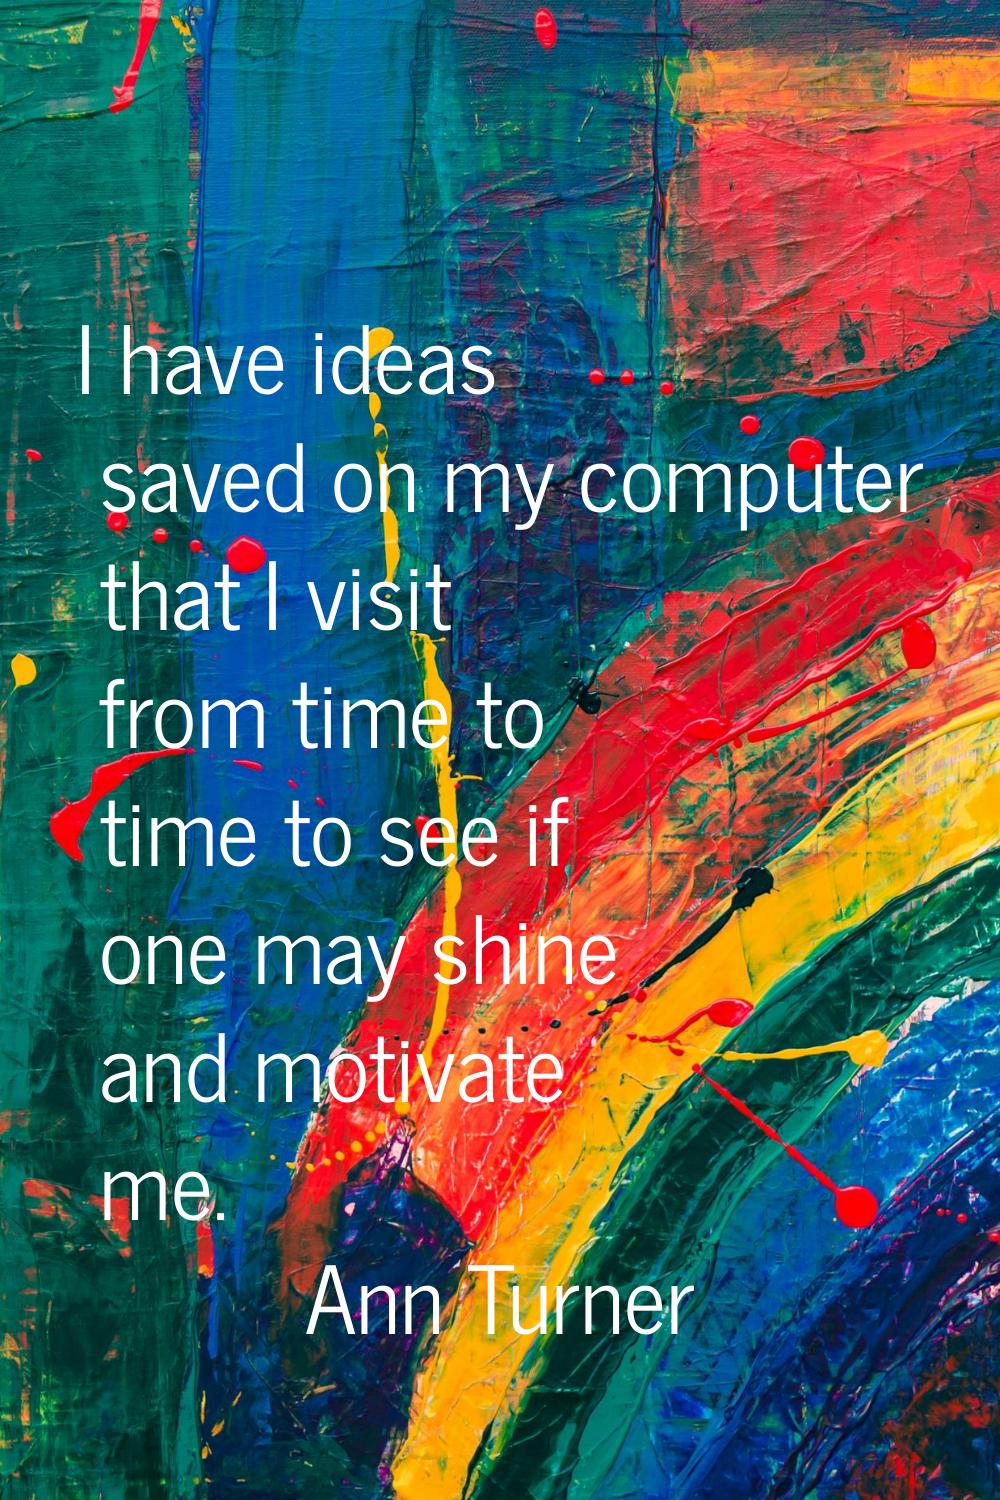 I have ideas saved on my computer that I visit from time to time to see if one may shine and motiva